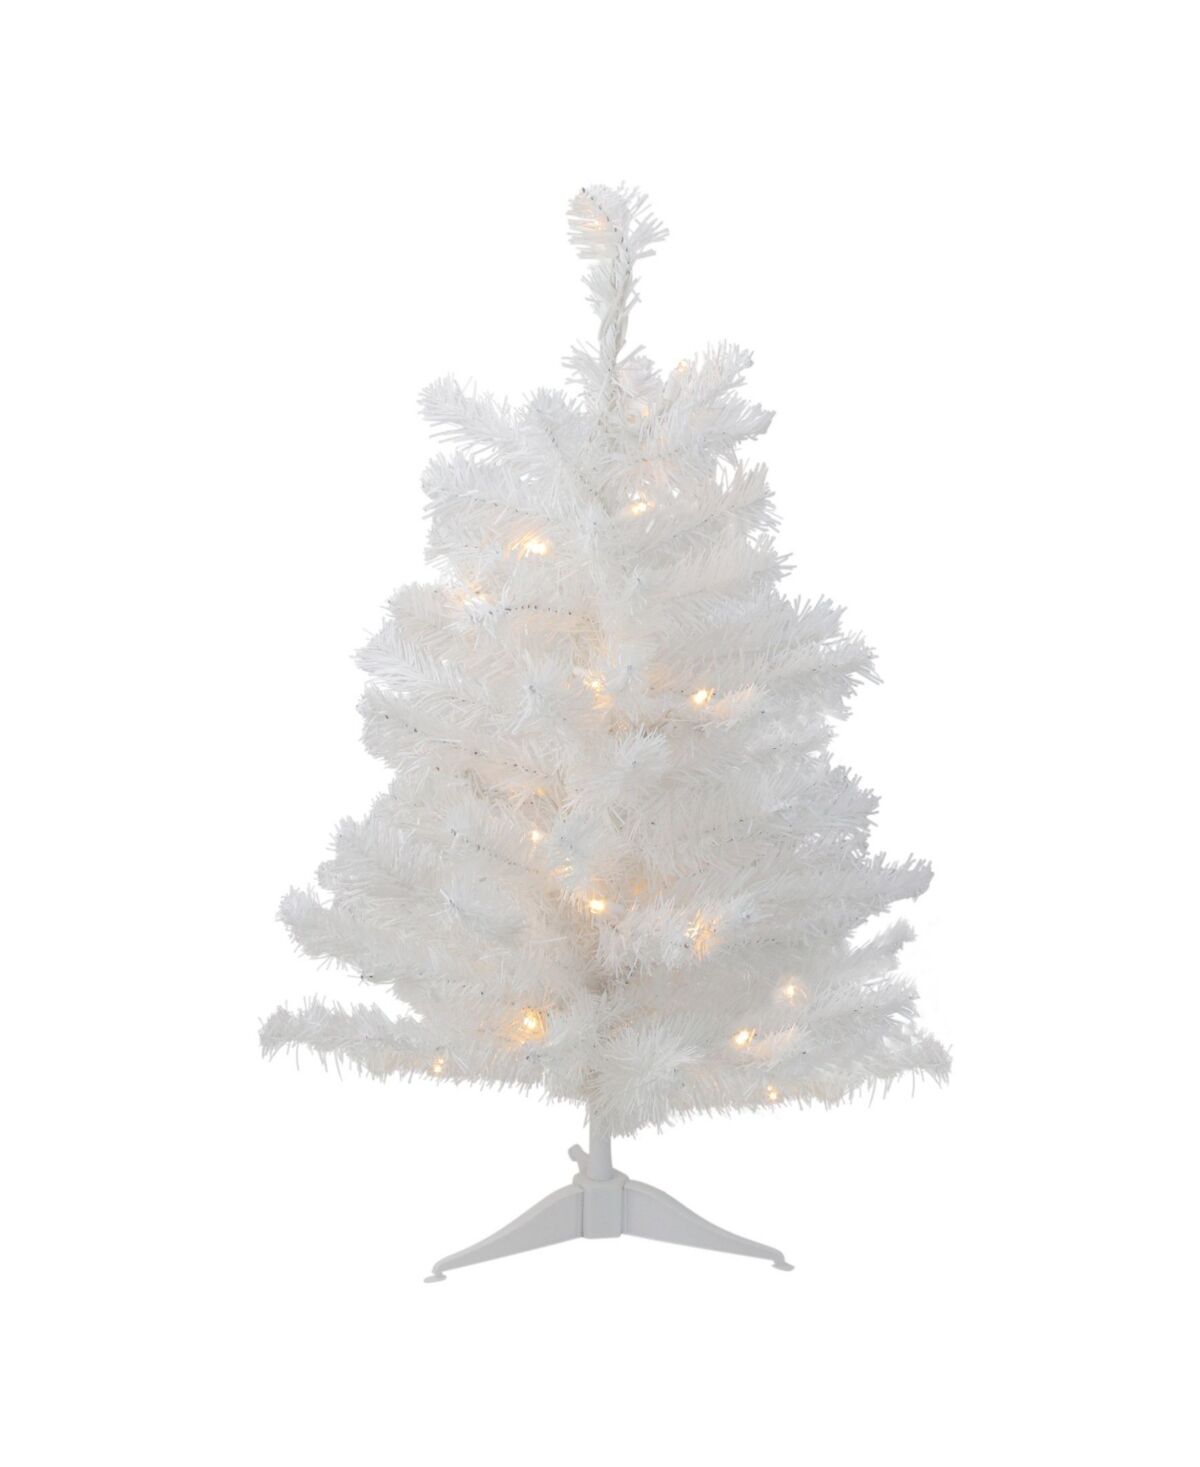 Northlight 2' Pre-Lit Led Snow White Artificial Christmas Tree - Candlelight Lights - White